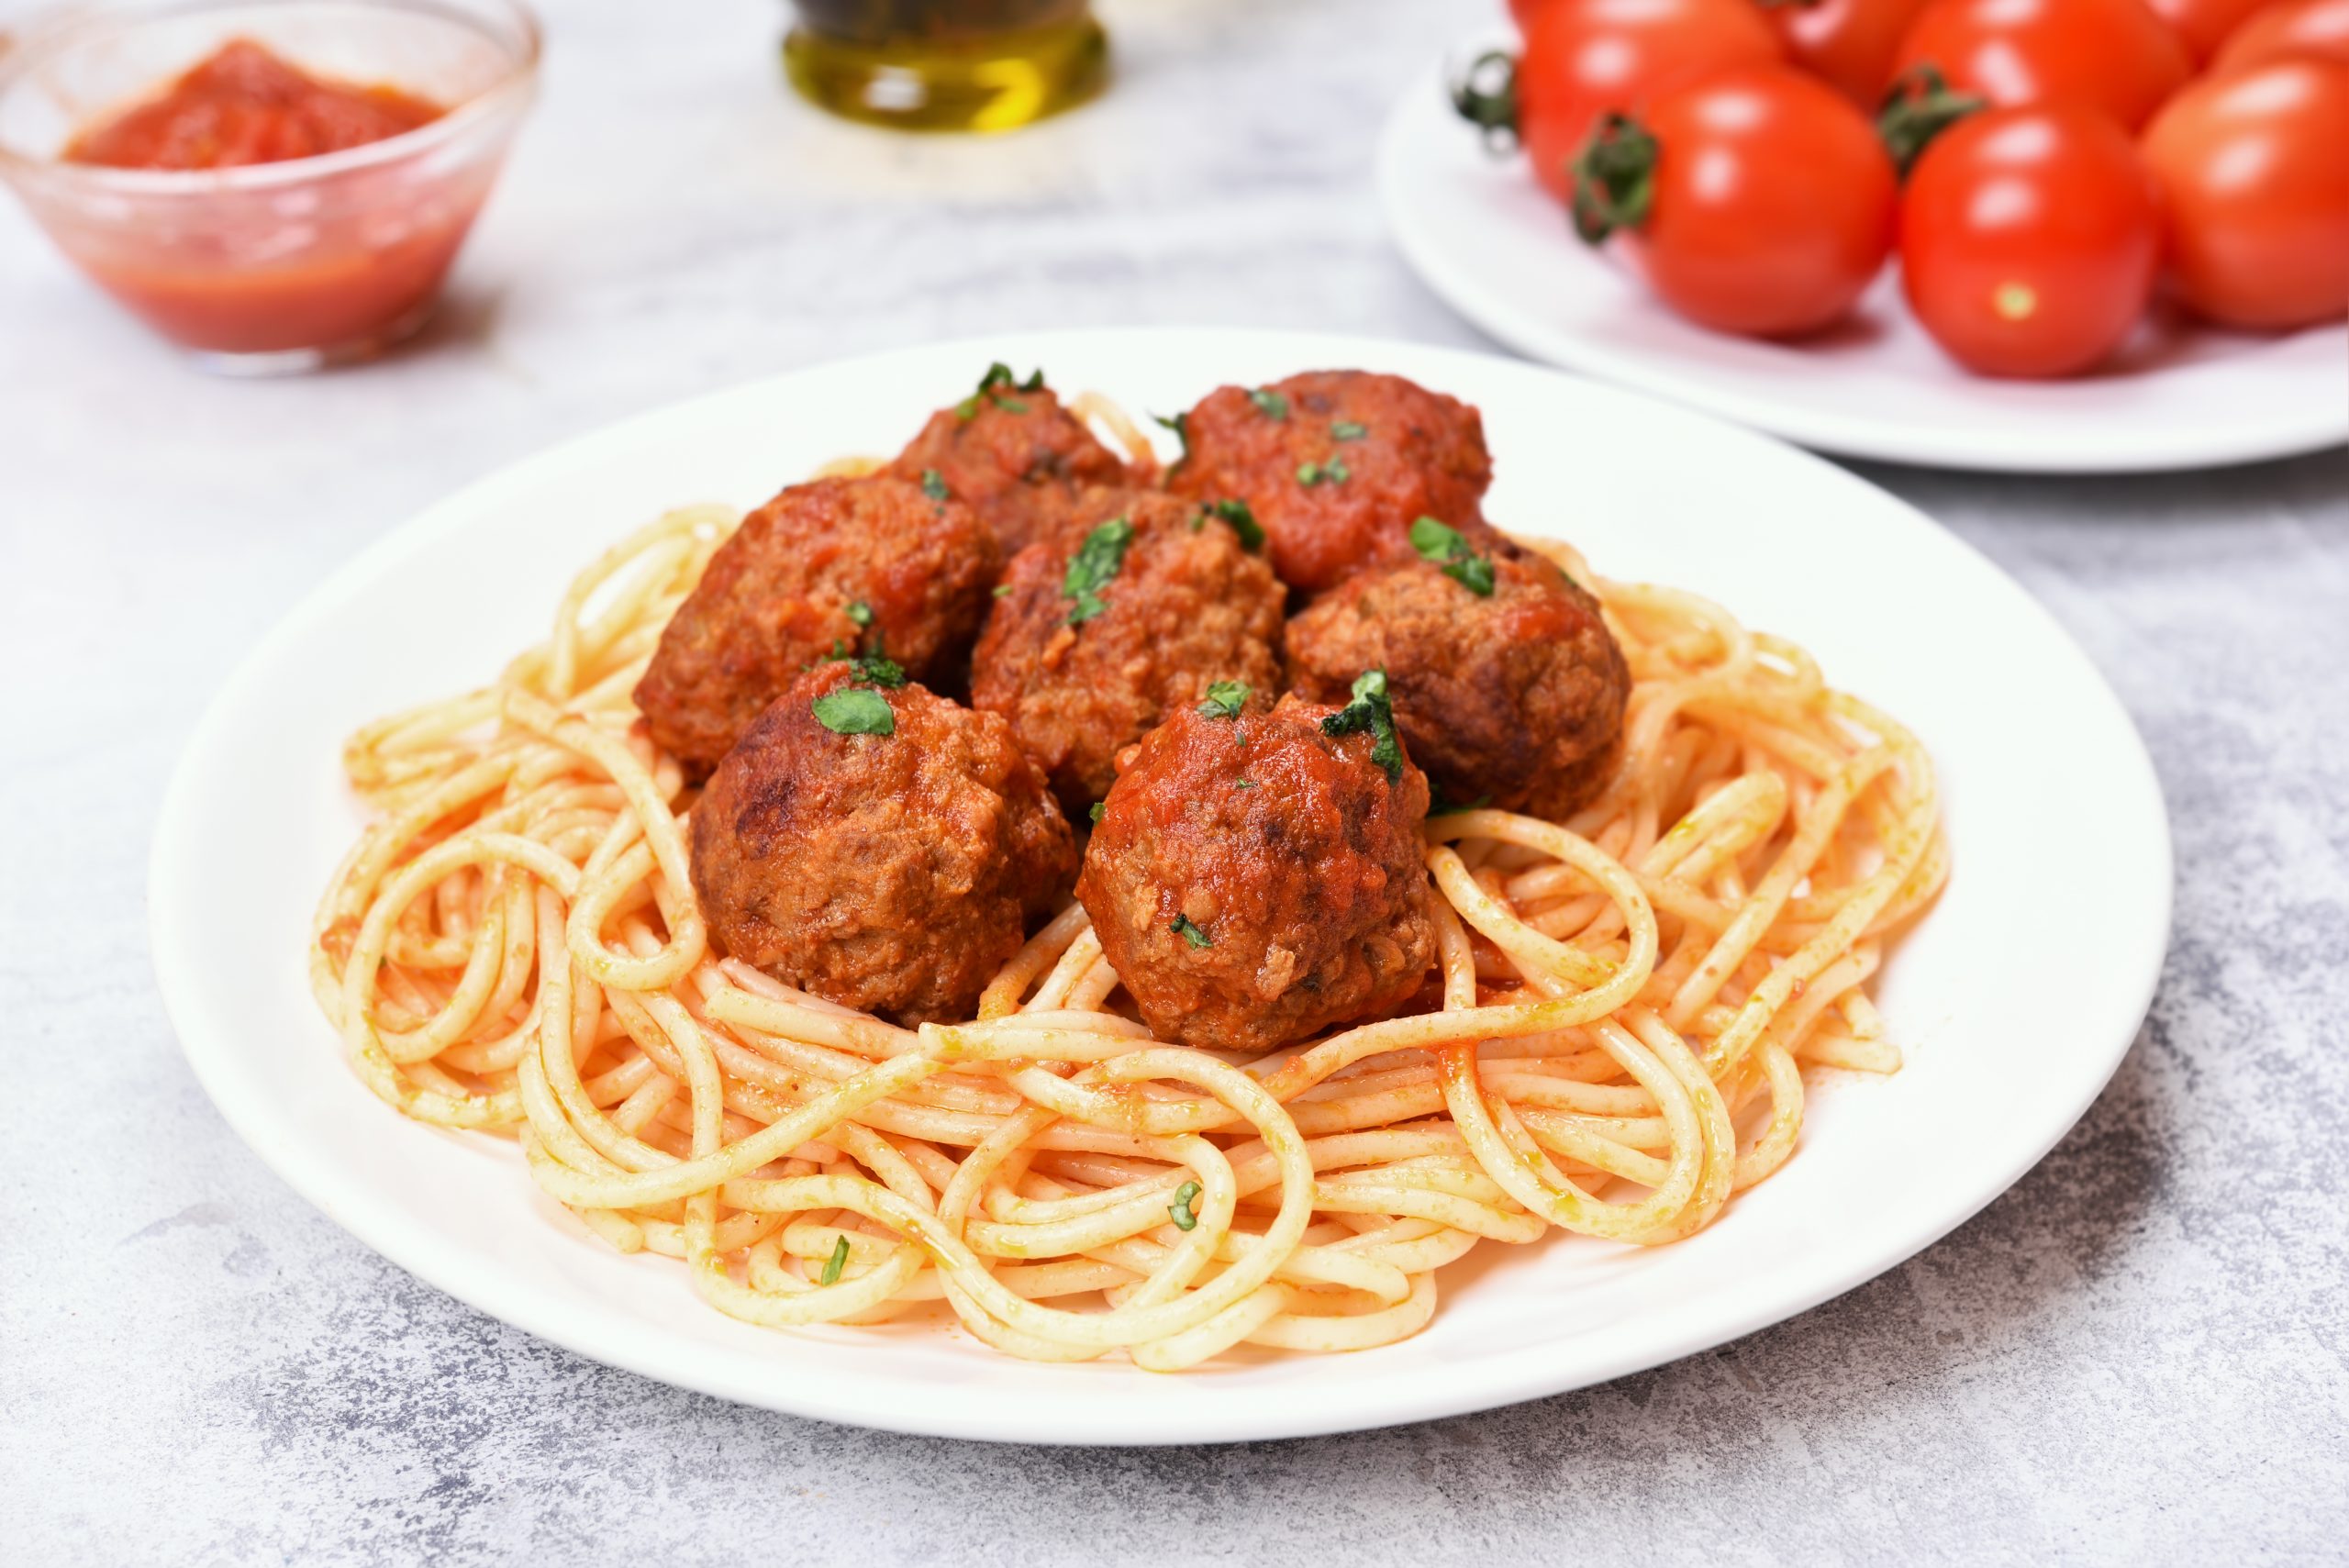 Italian Meatballs Recipe Without Breadcrumbs And Parmesan Cheese